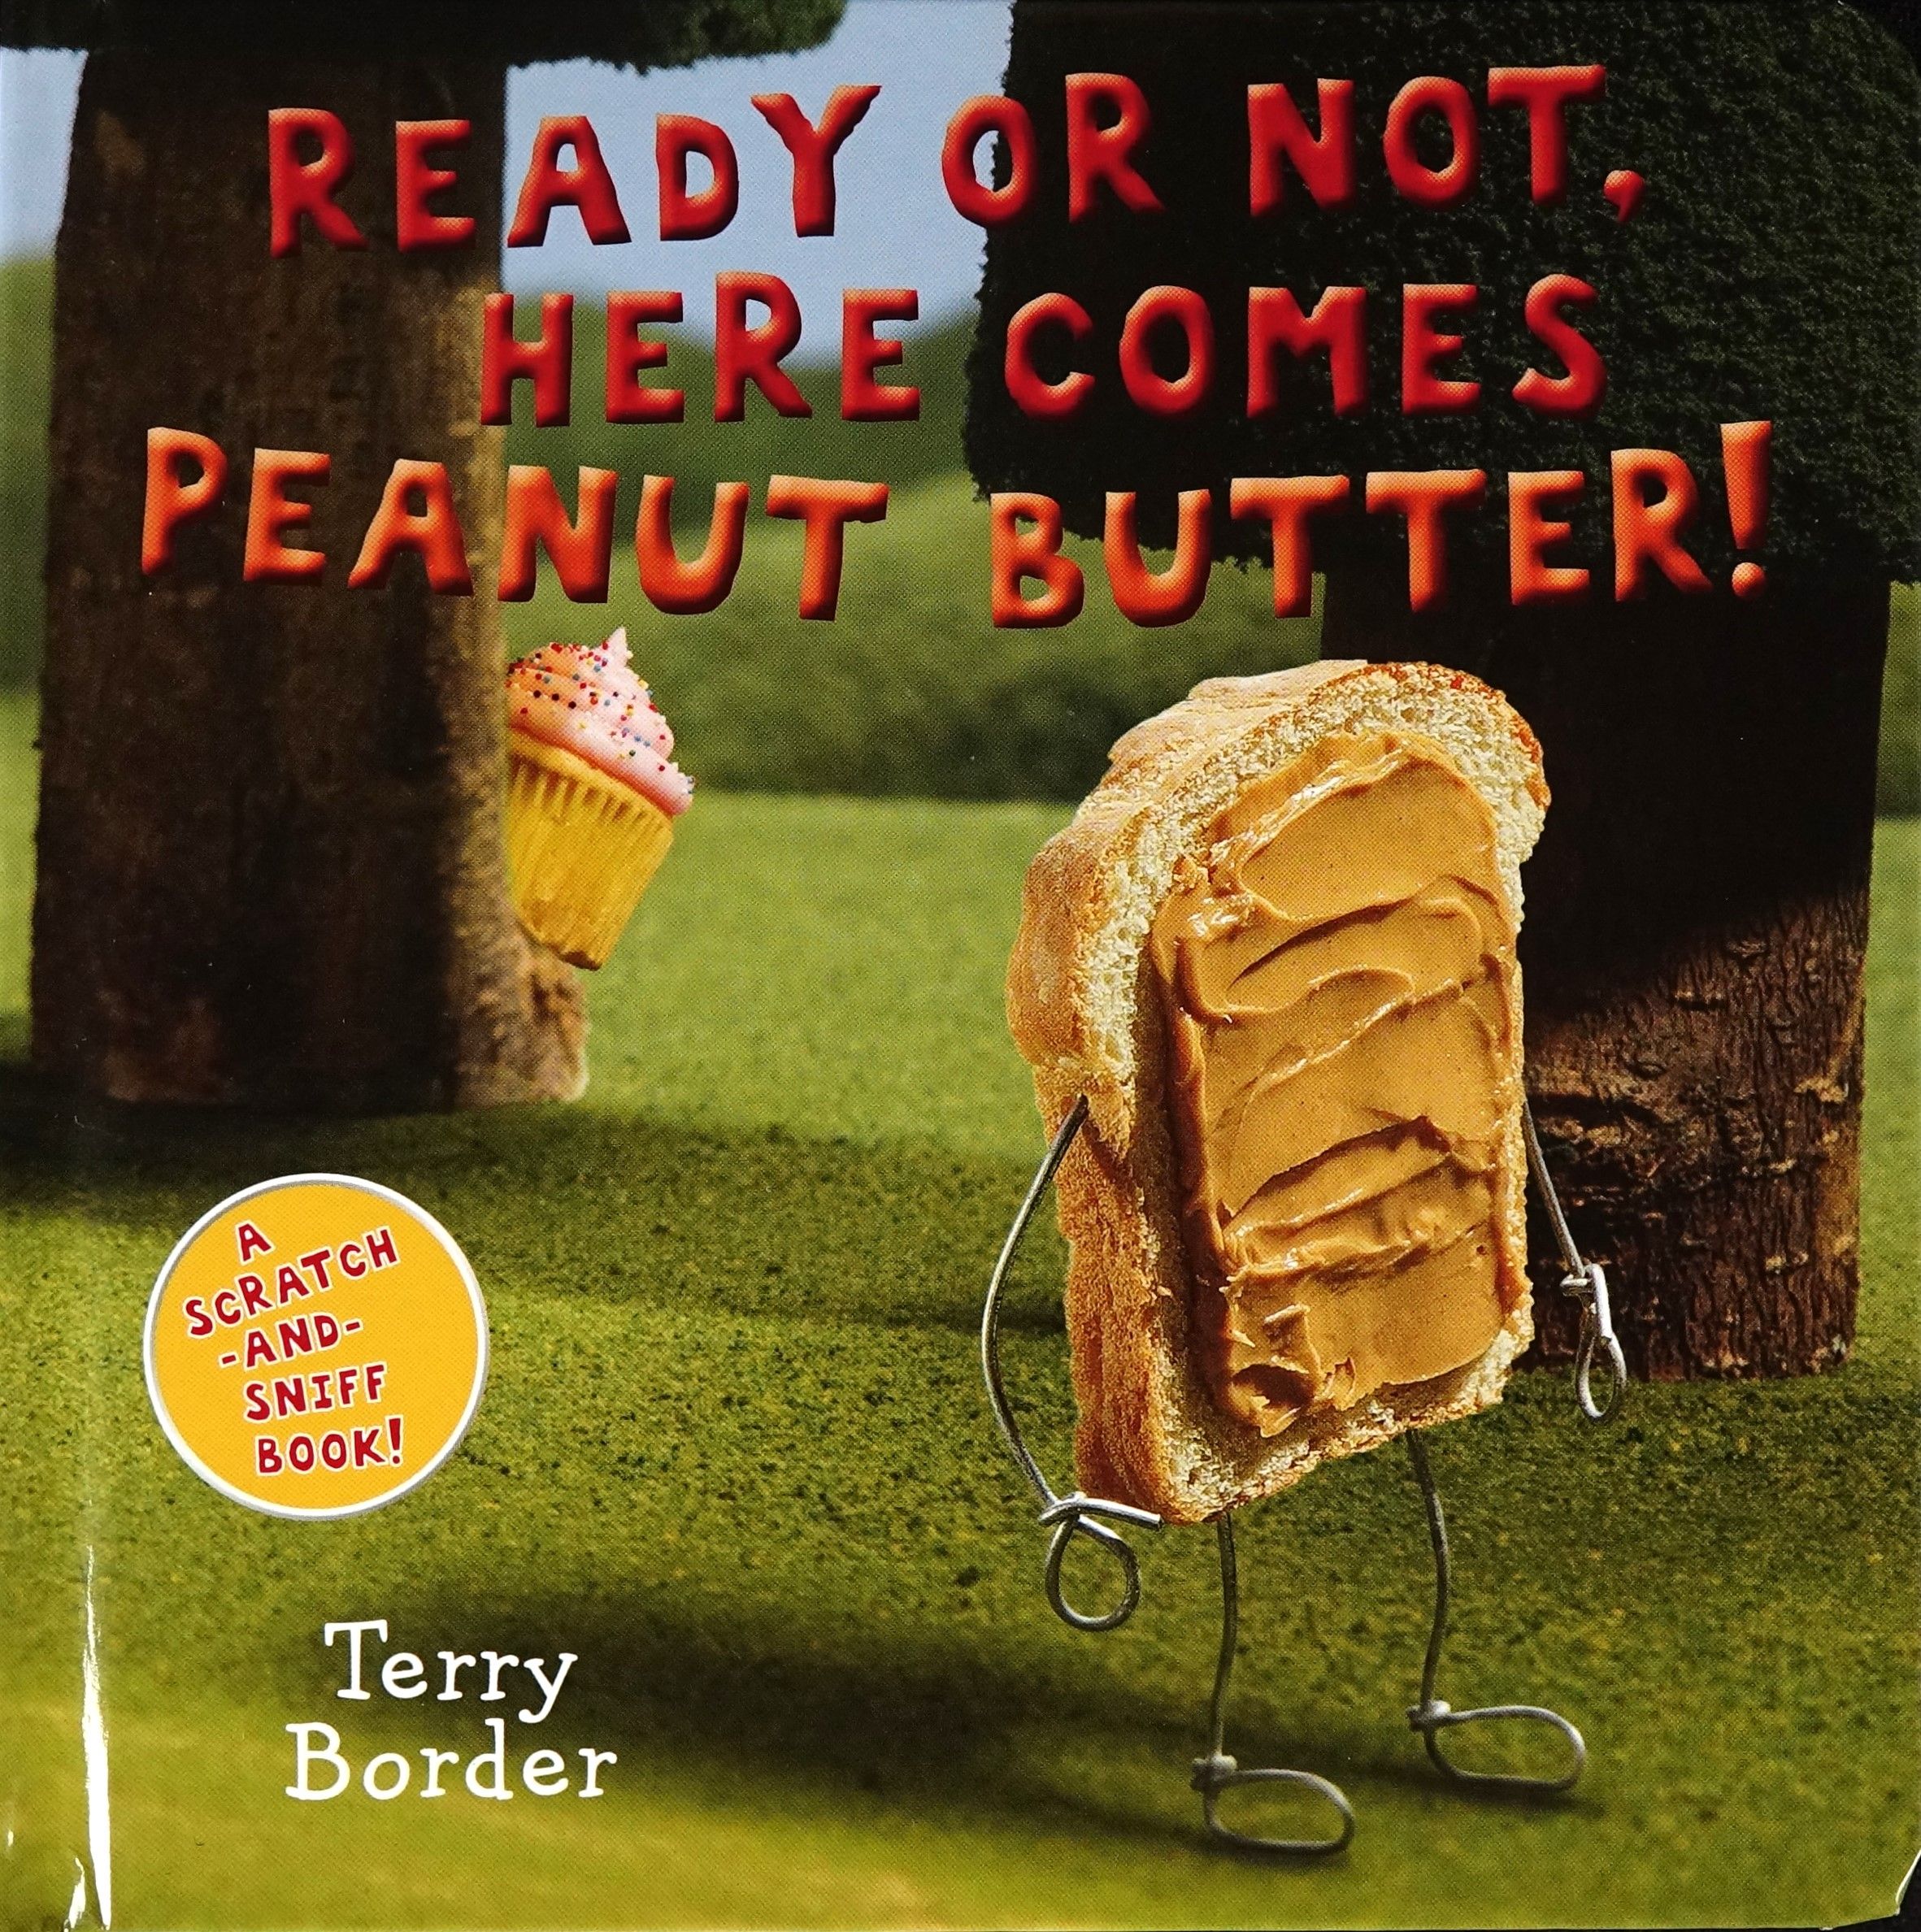 Here Comes Peanut Butter